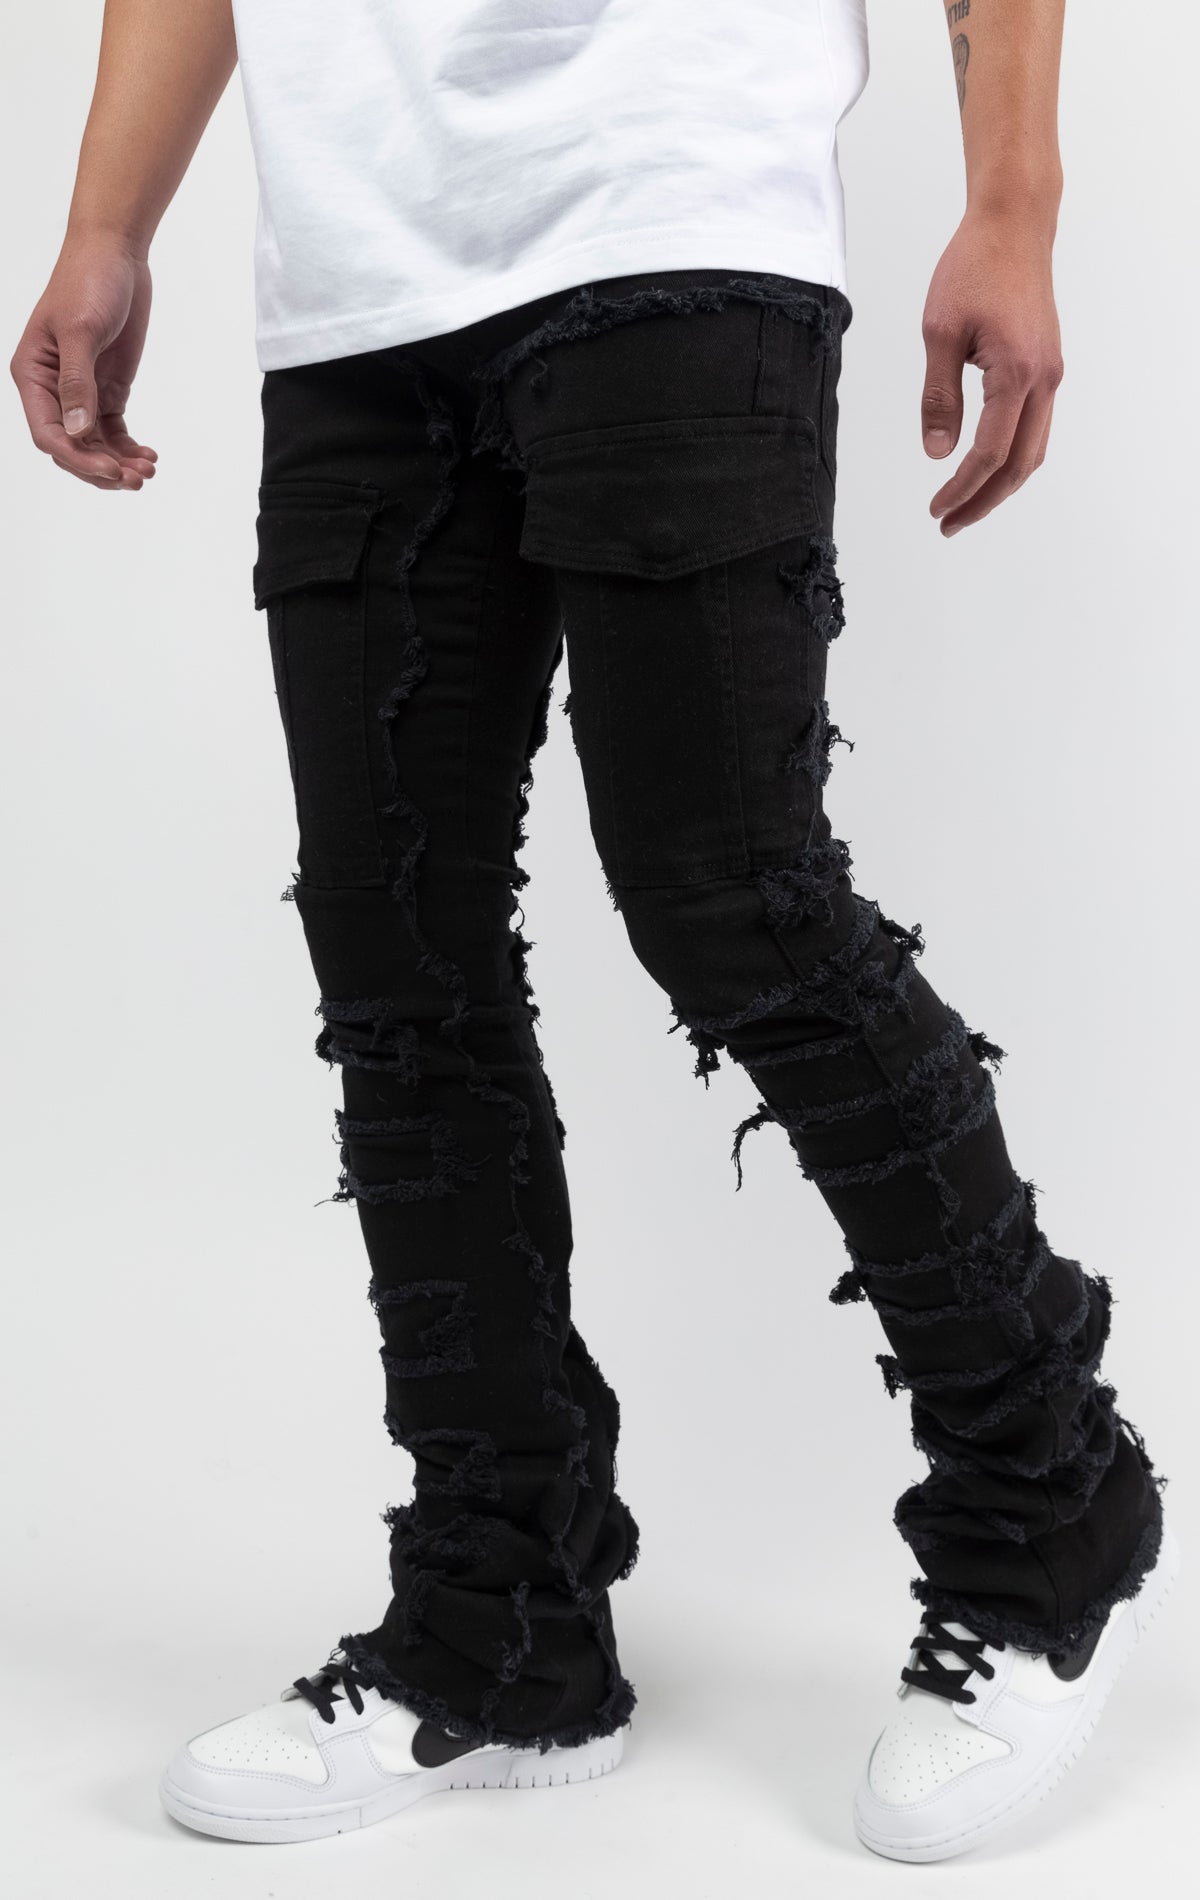 Black Fray panel with stitch design, stacked cargo jeans with classic 5 pockets and flared bottom leg.